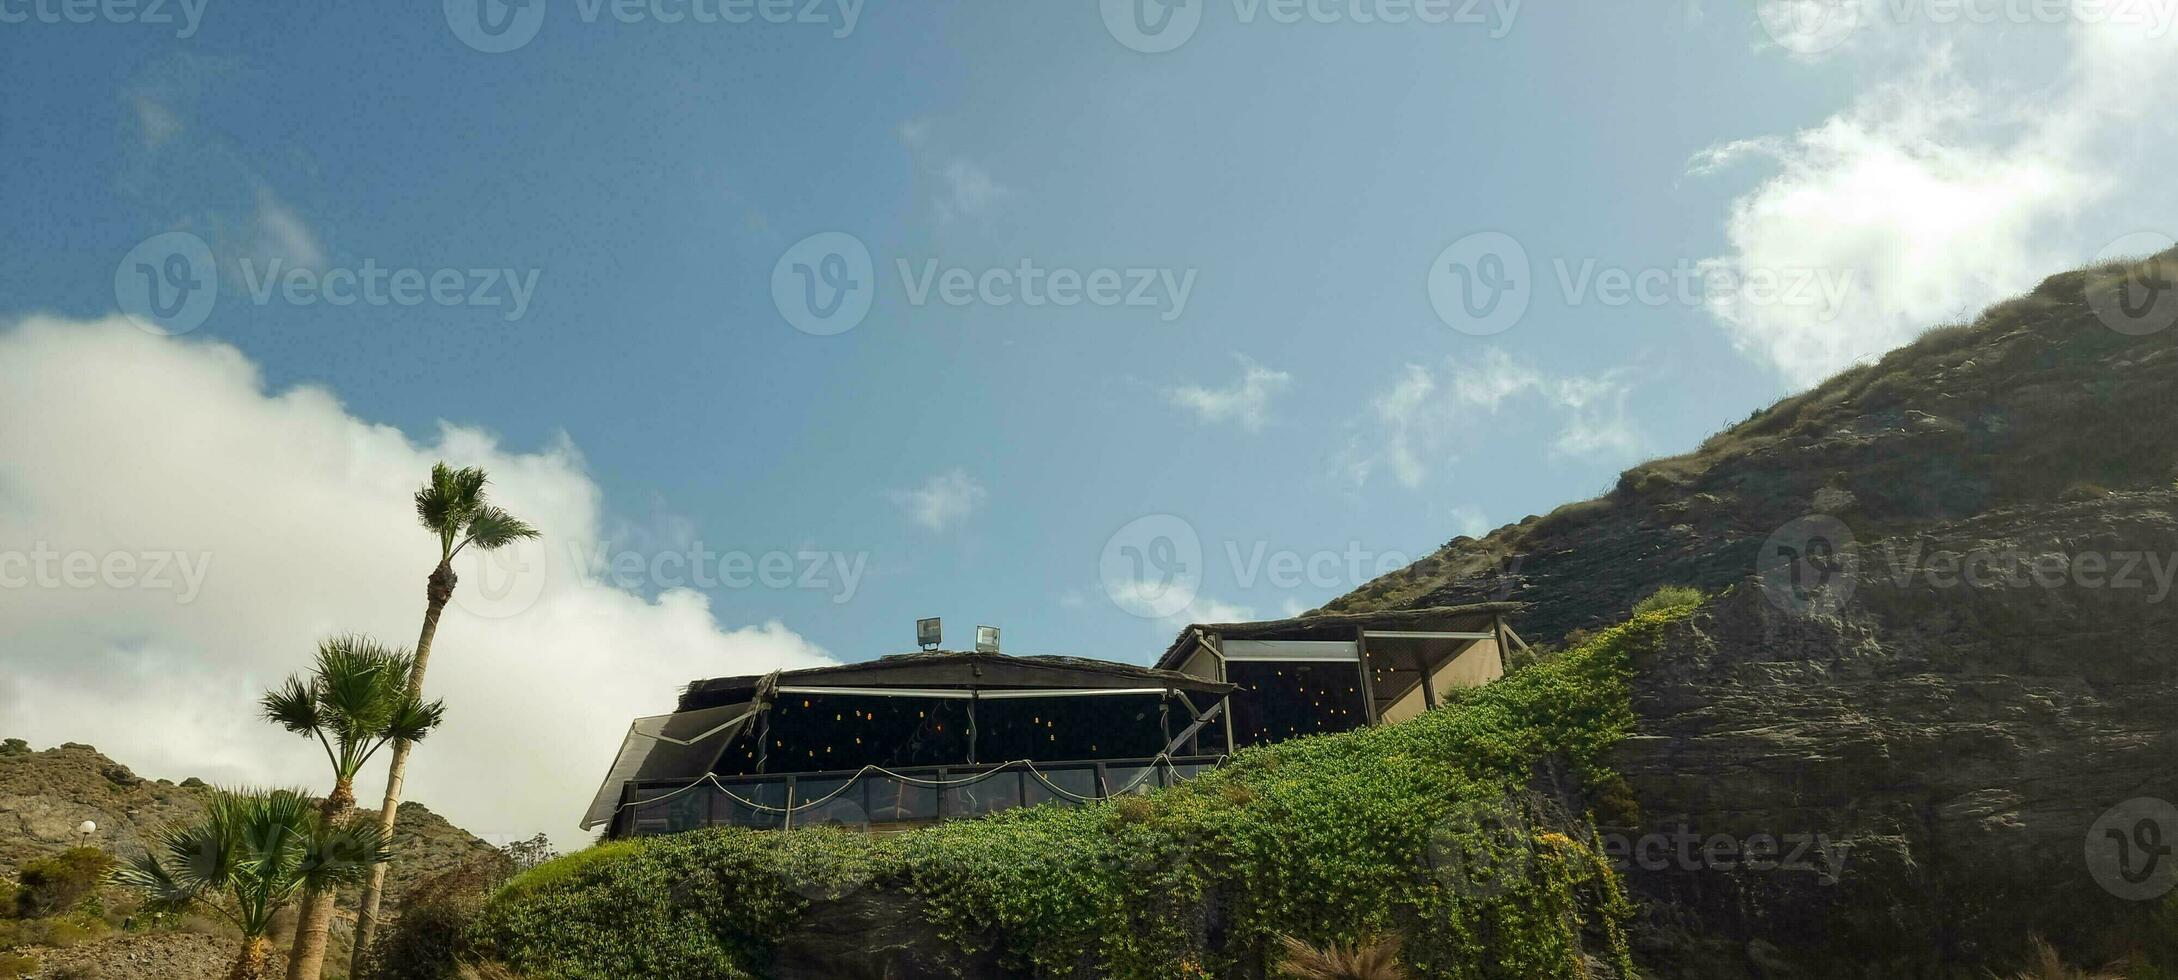 Scenic view of a rustic house on a hillside with lush greenery under a clear blue sky with a single palm tree. photo